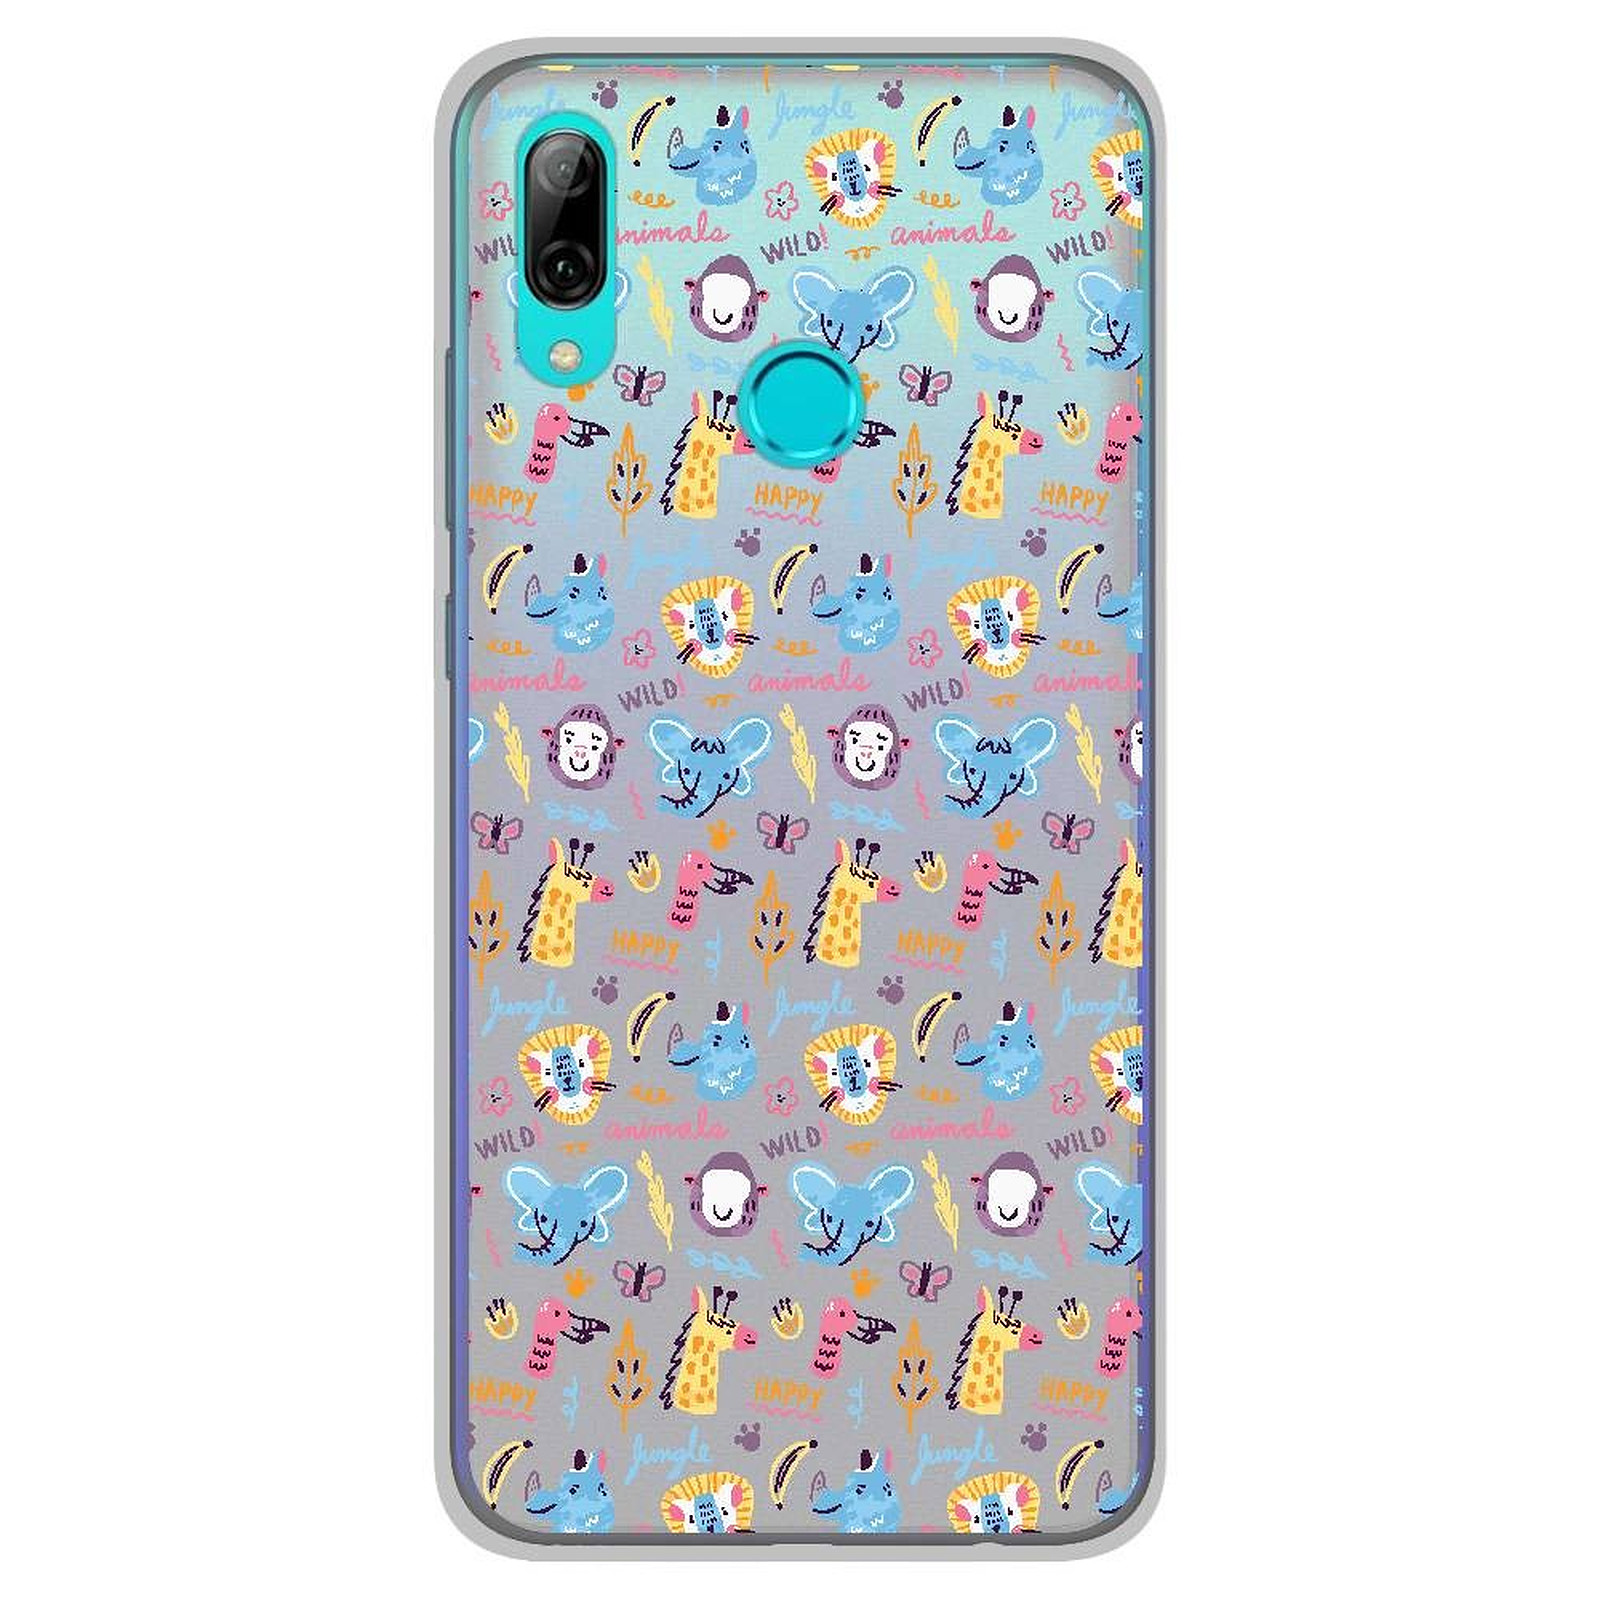 1001 Coques Coque silicone gel Huawei P Smart 2019 motif Happy animals - Coque telephone 1001Coques